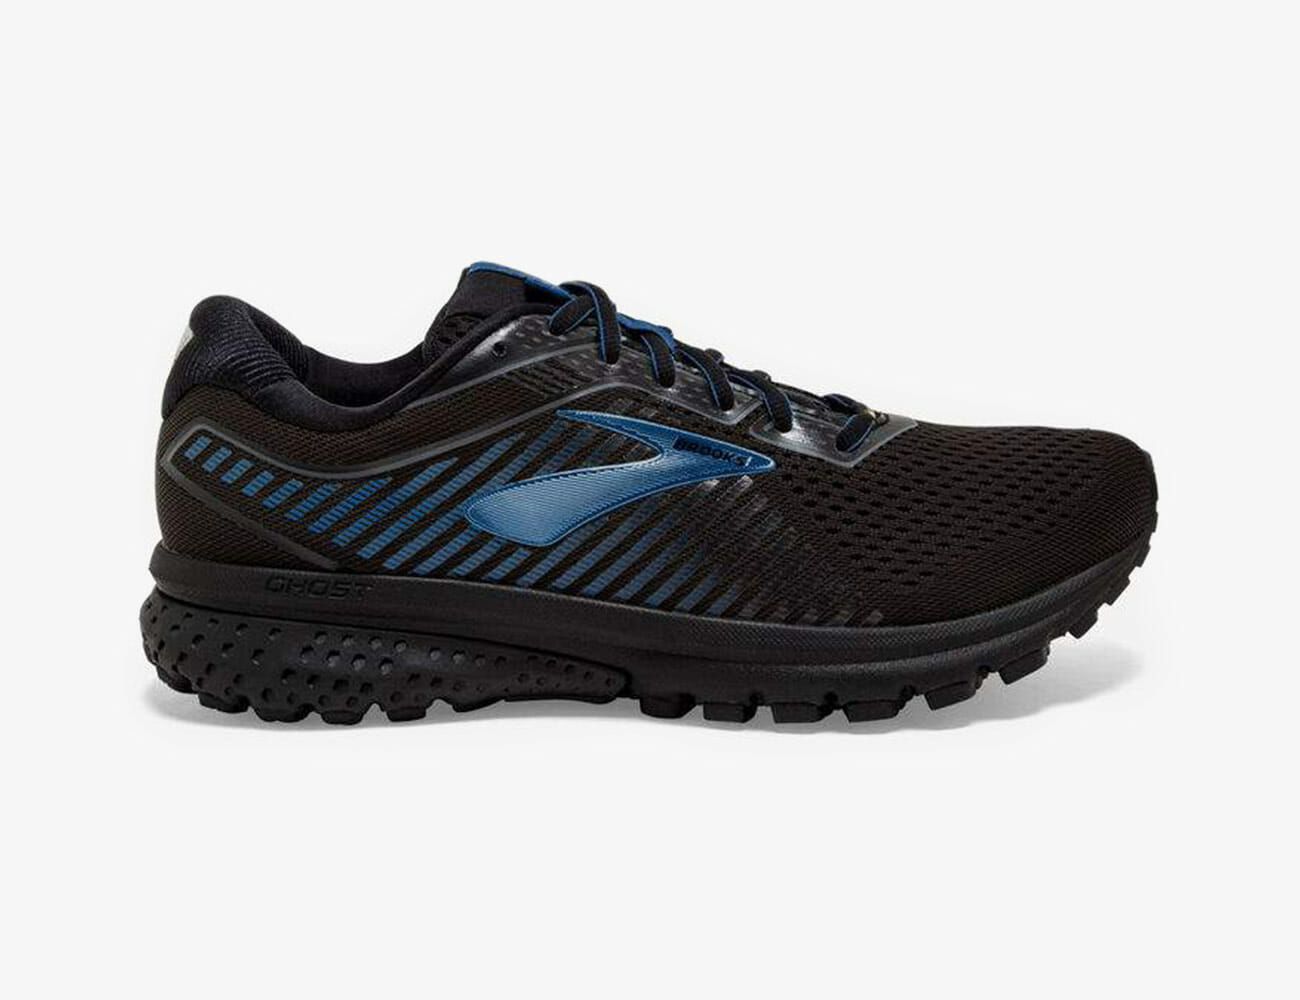 highest rated running shoes 2019